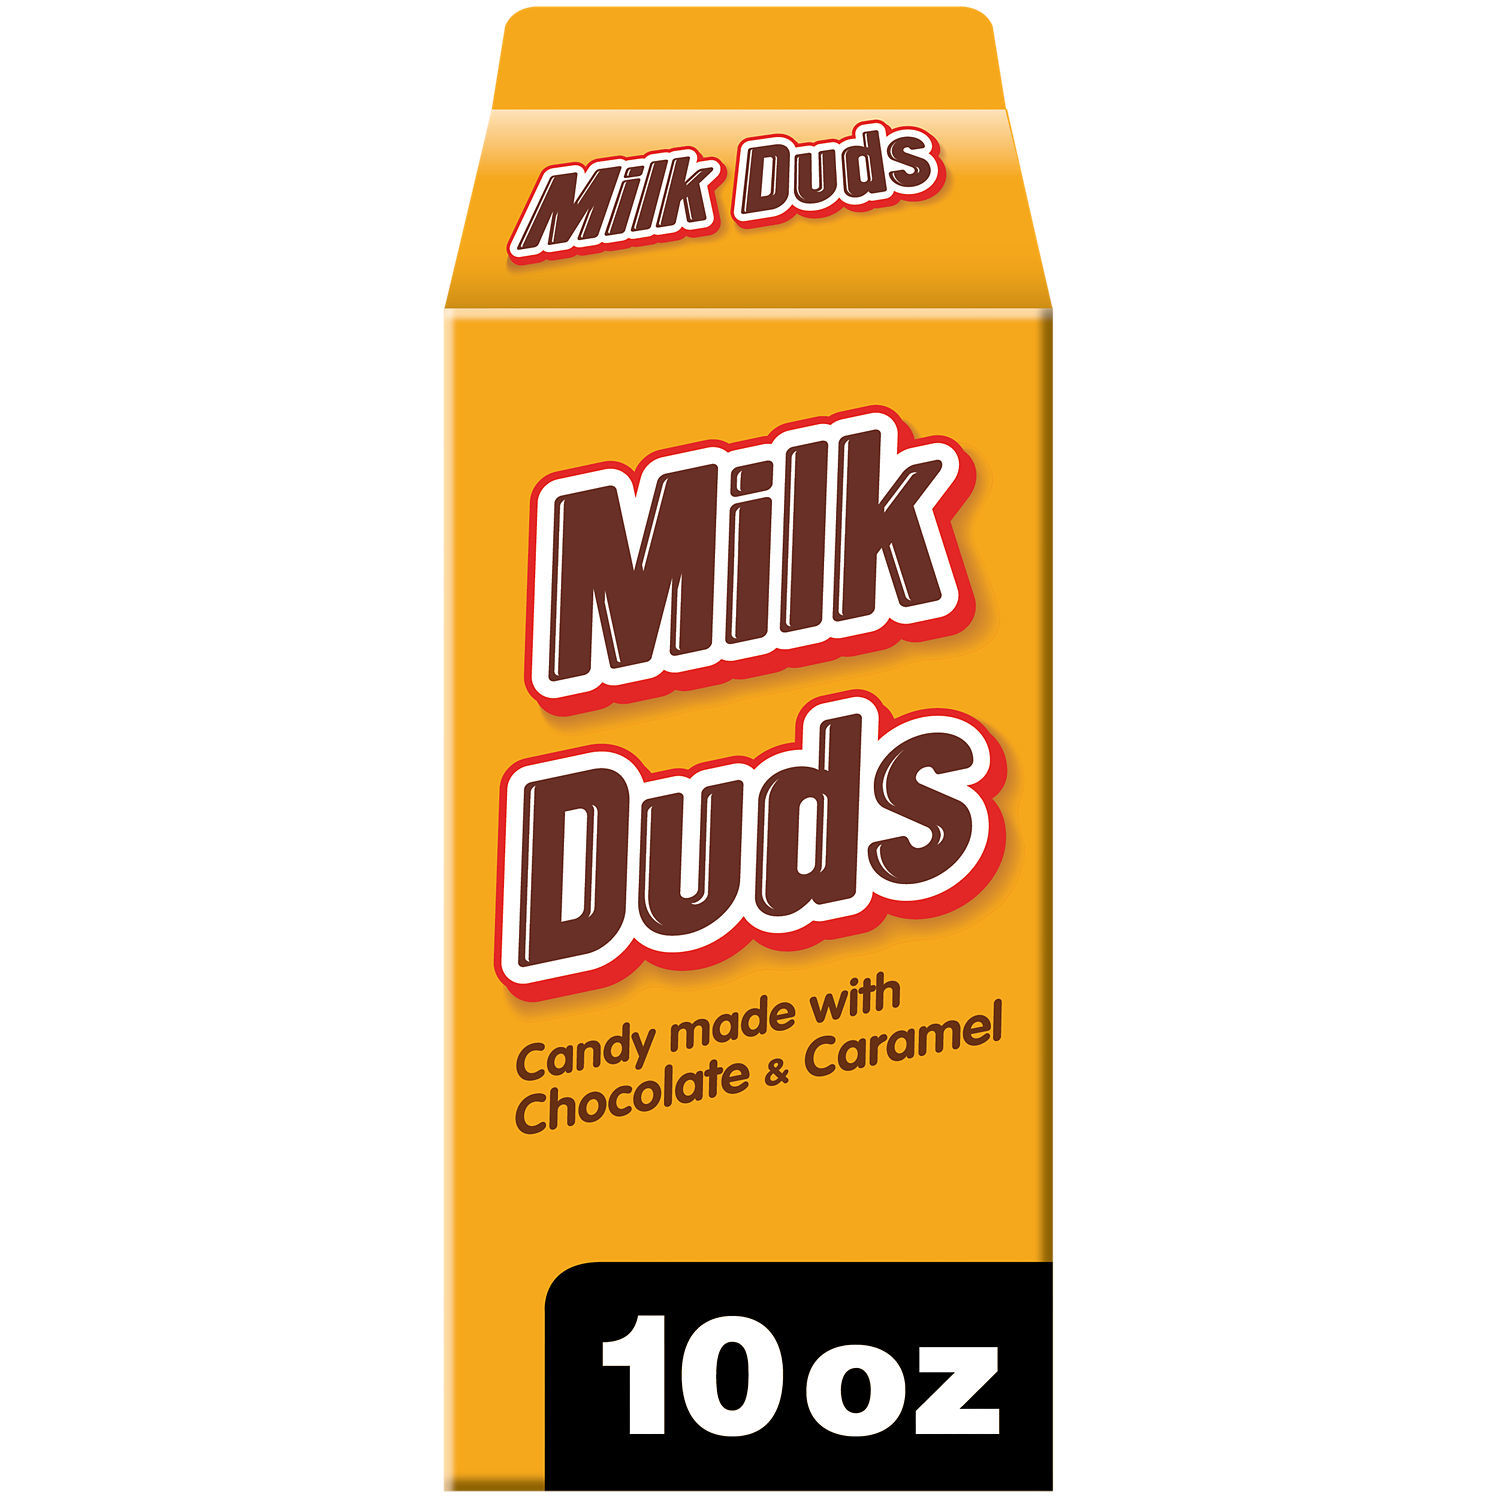 Milk Duds Chocolate and Caramel Candy, Box 10 oz - image 1 of 9